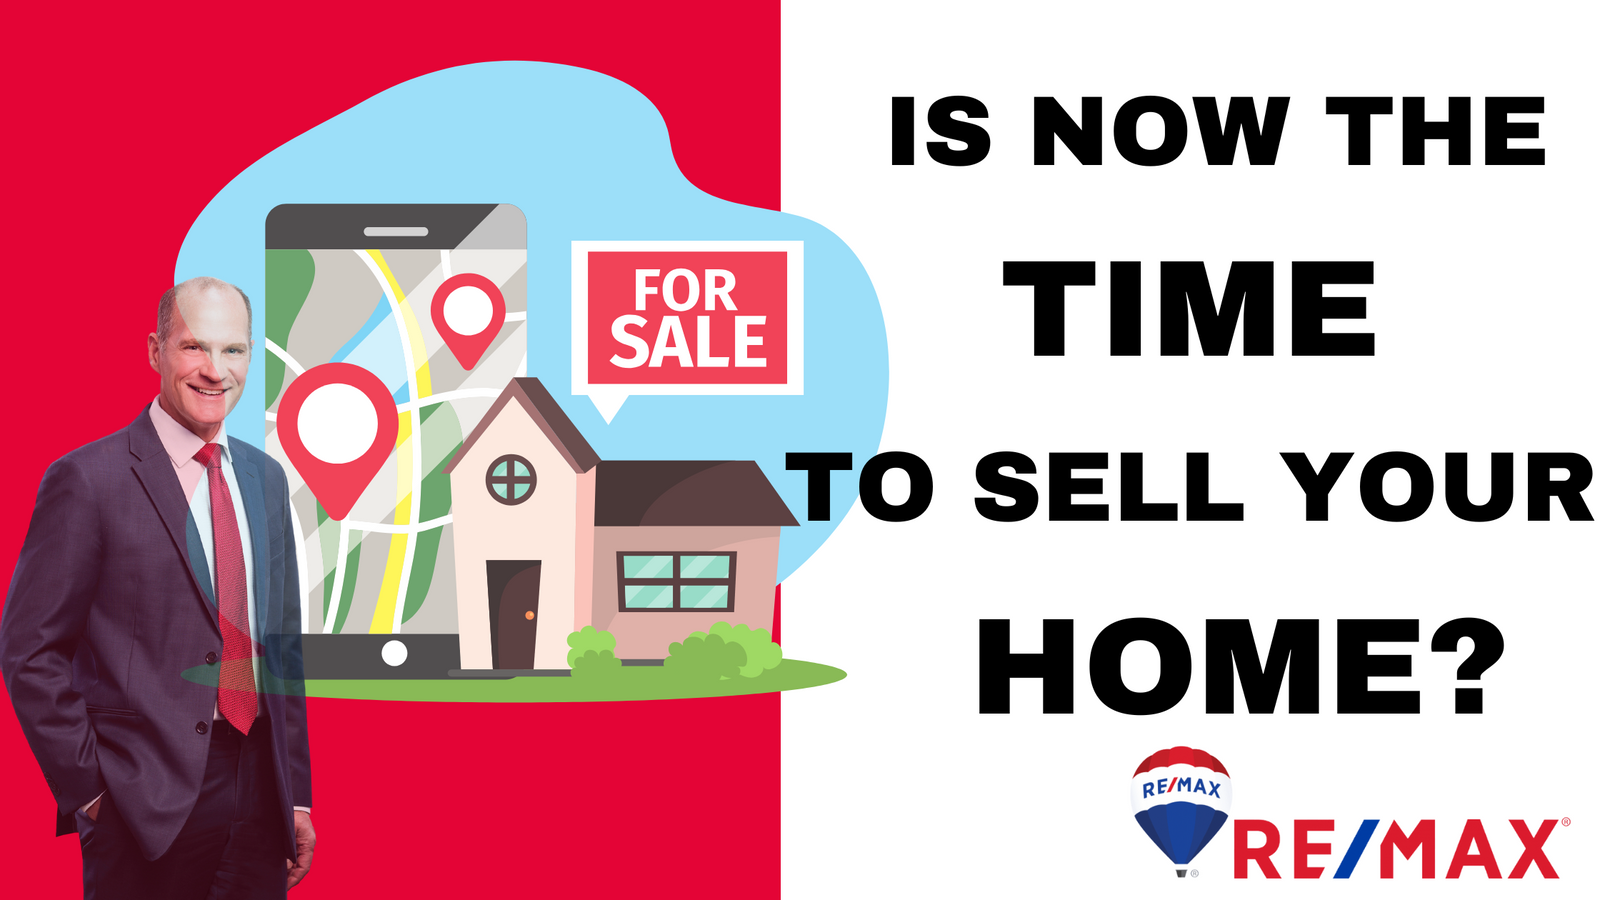 Now is a good time to sell your house.